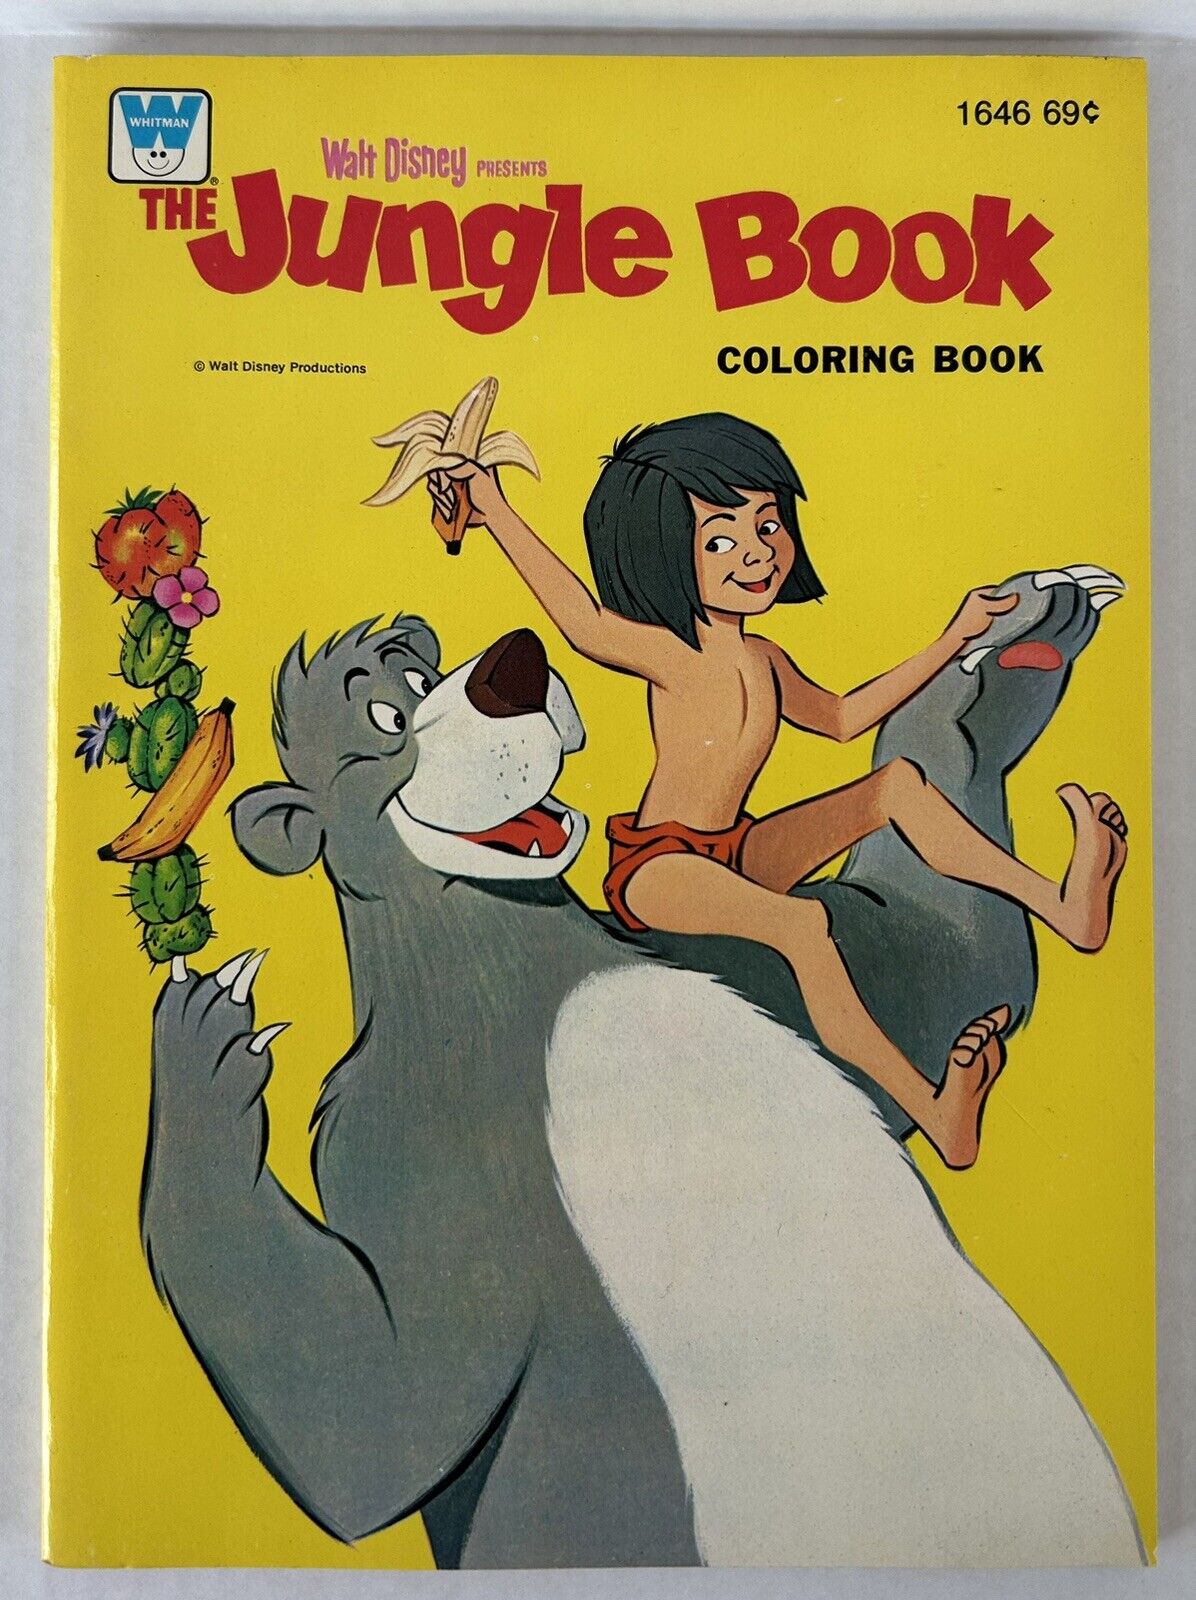 Vintage Disney's The Jungle Book Coloring Book 1967 Whitman Books New Unused